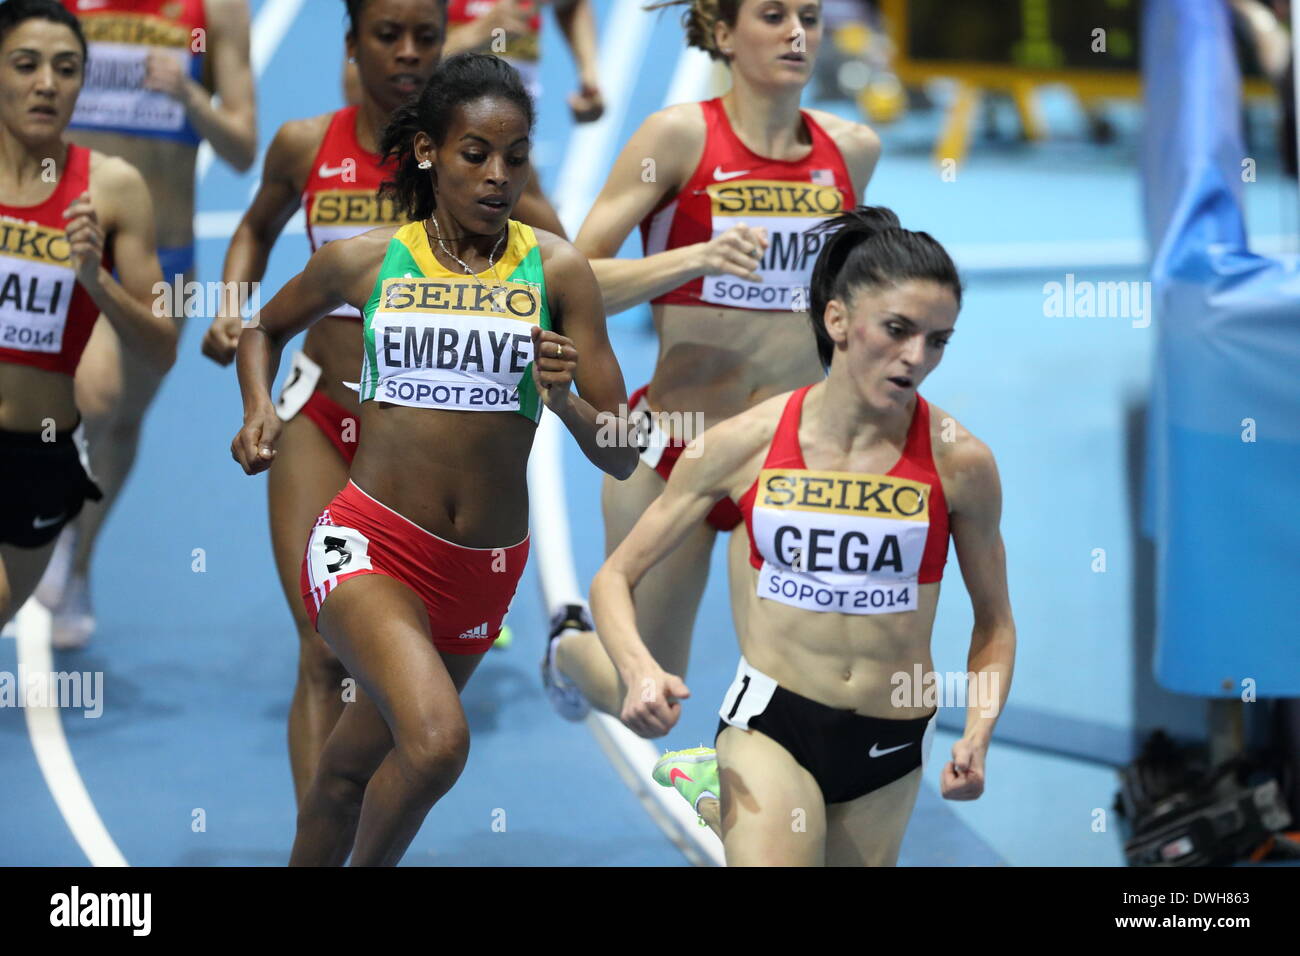 Sopot, Poland 8th, March 2014 IAAF World Indoor Championships in Sopot.  Abeba Aregawi (Sweden) wins 1500 Metres final. Luiza Gega (Albania) (R) and Axumawit Embaye (Ethiopia) (L) competite during the run. Stock Photo